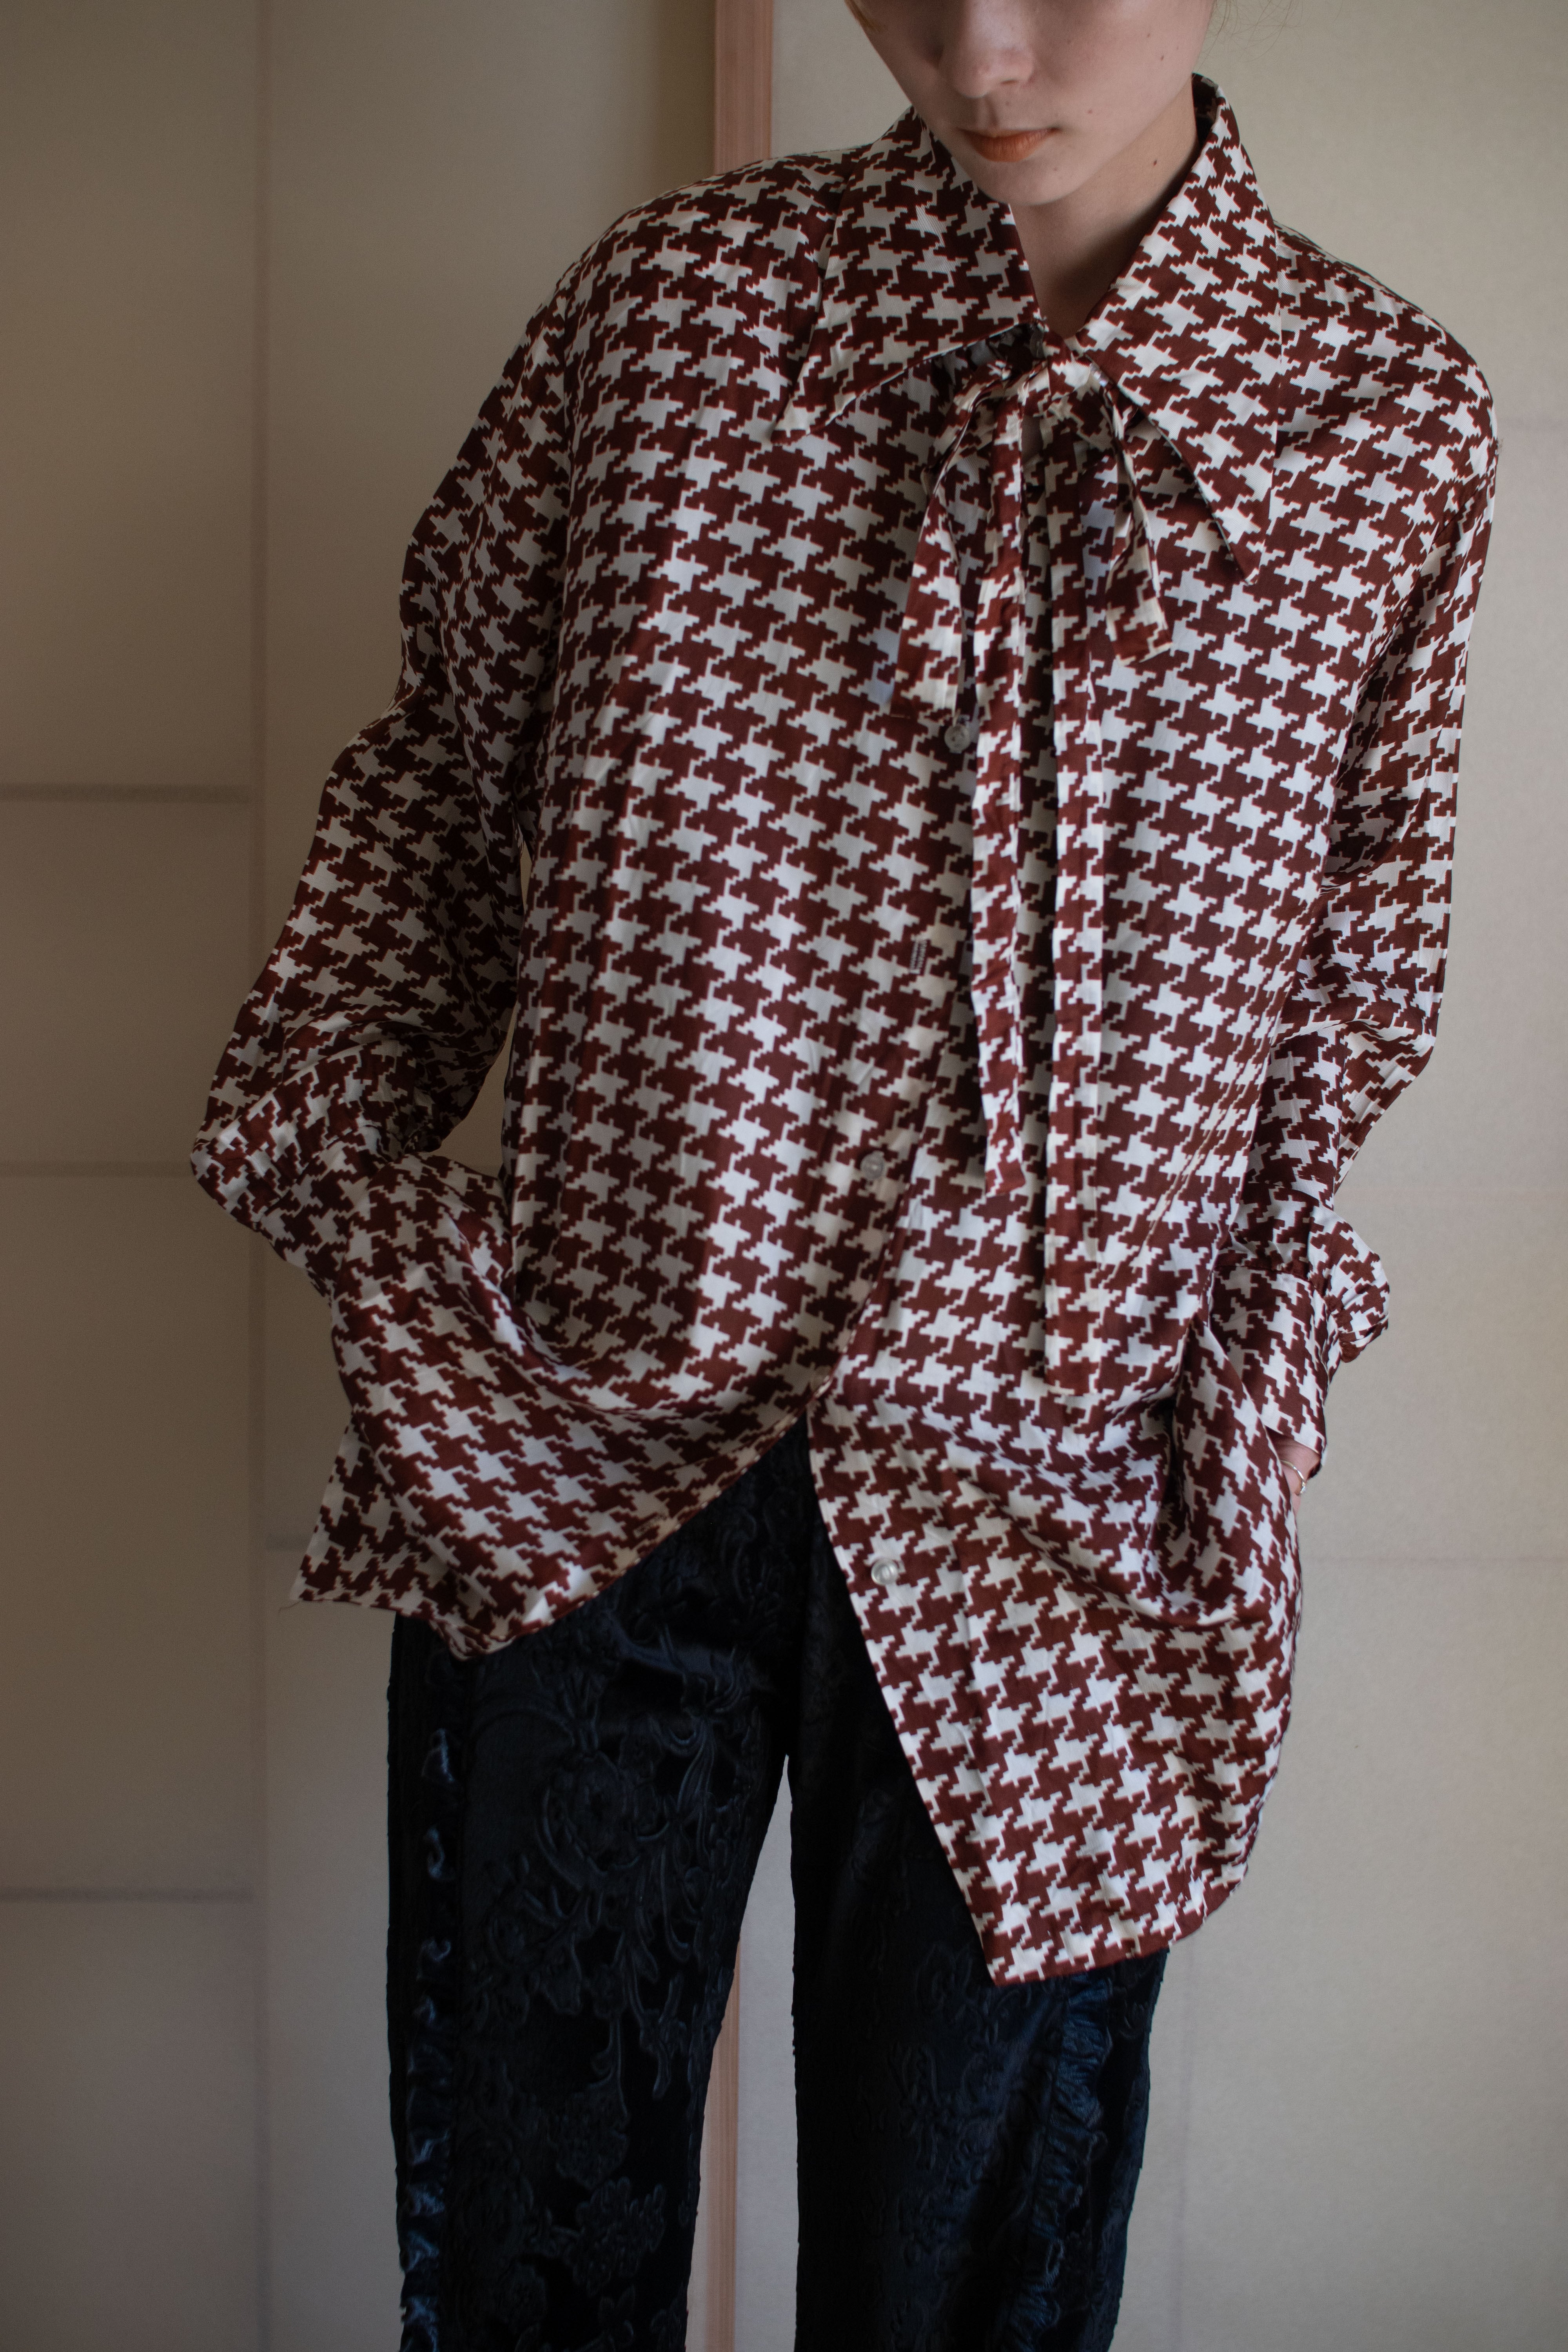 1970-80s Houndstooth pattern printed blouse